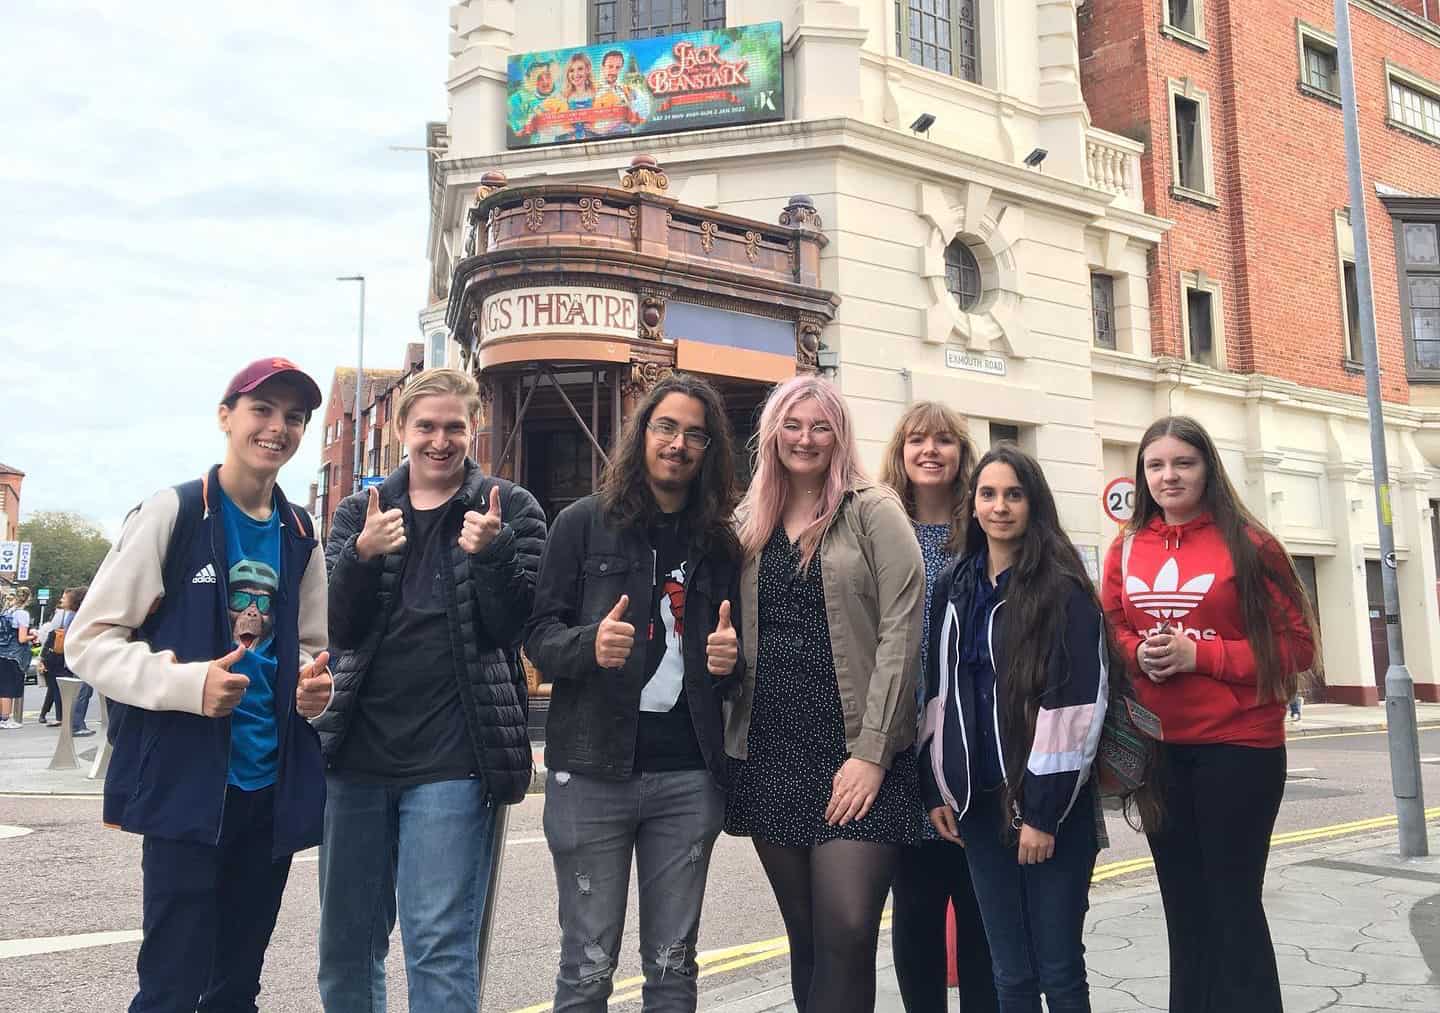 Brave Island-ers on the King's Theatre trip